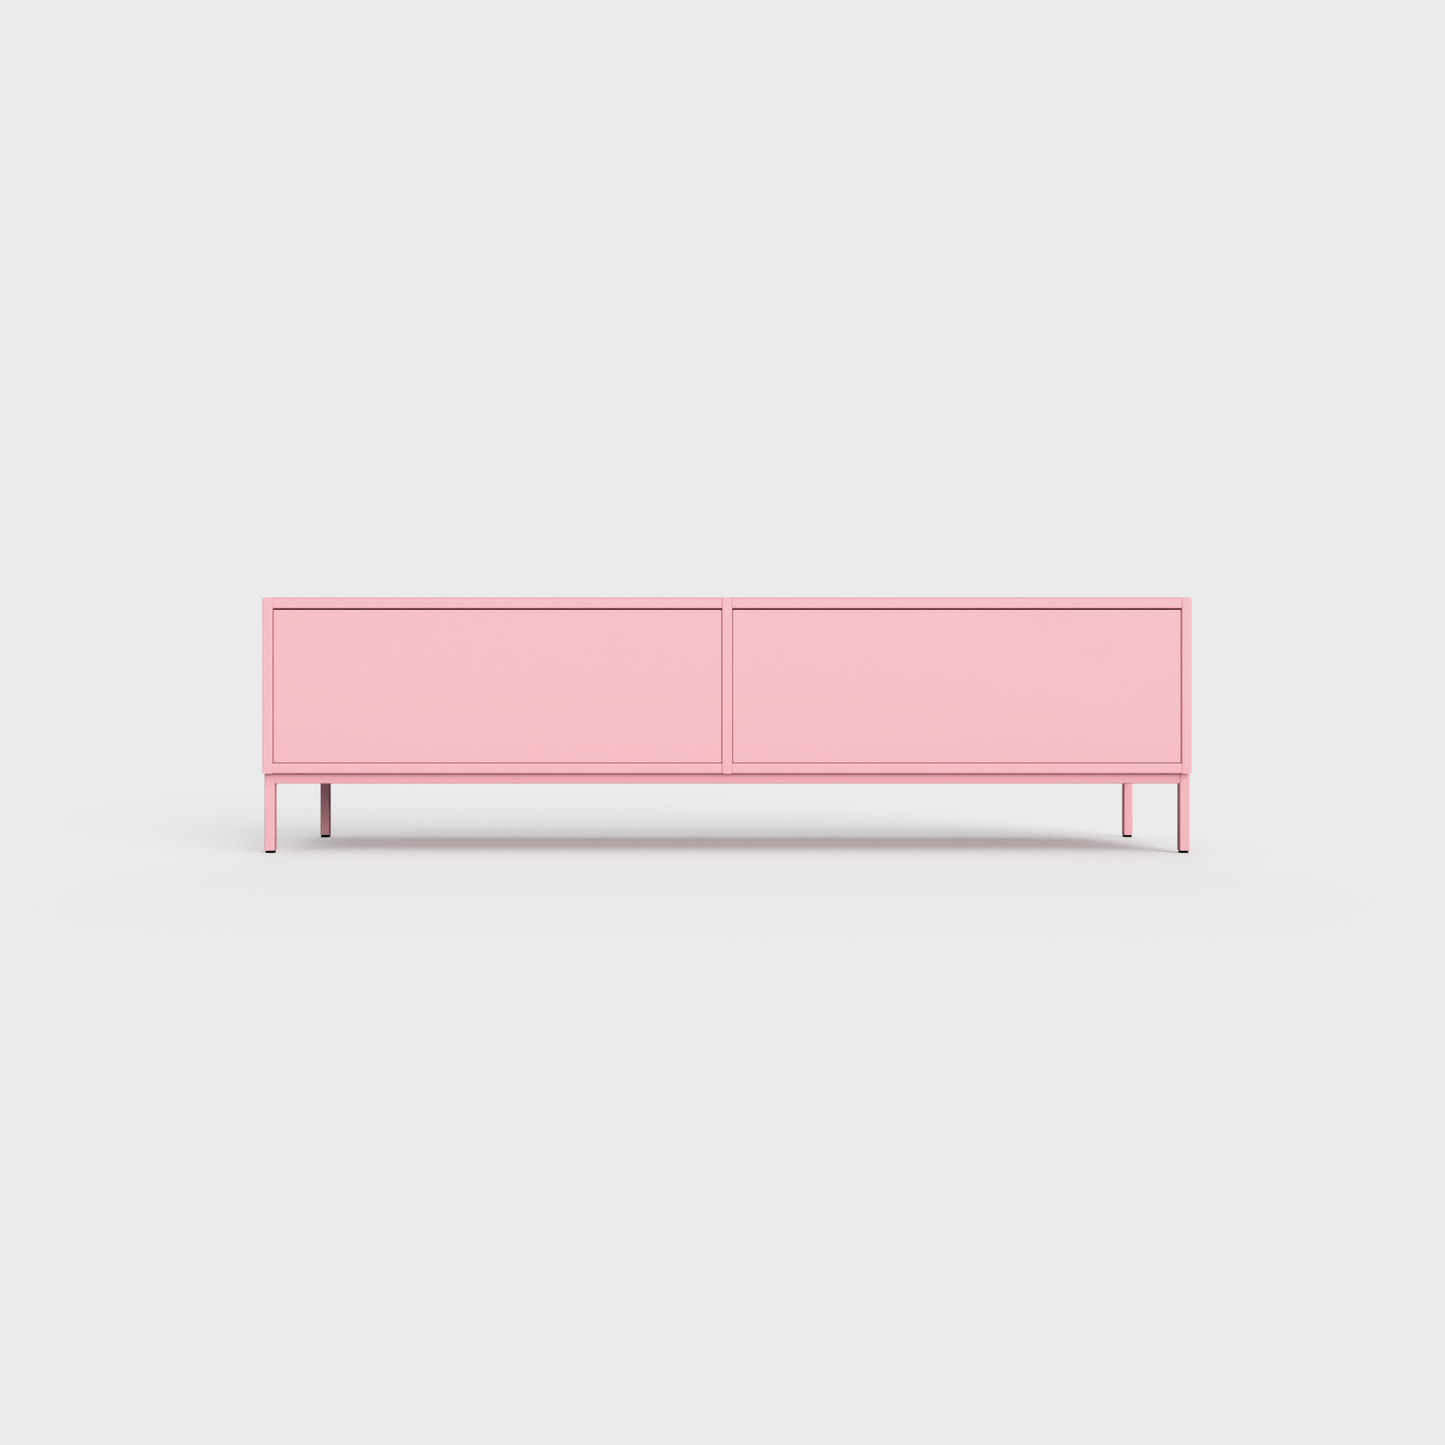 Prunus 01 Lowboard in Lily color, powder-coated steel, elegant and modern piece of furniture for your living room